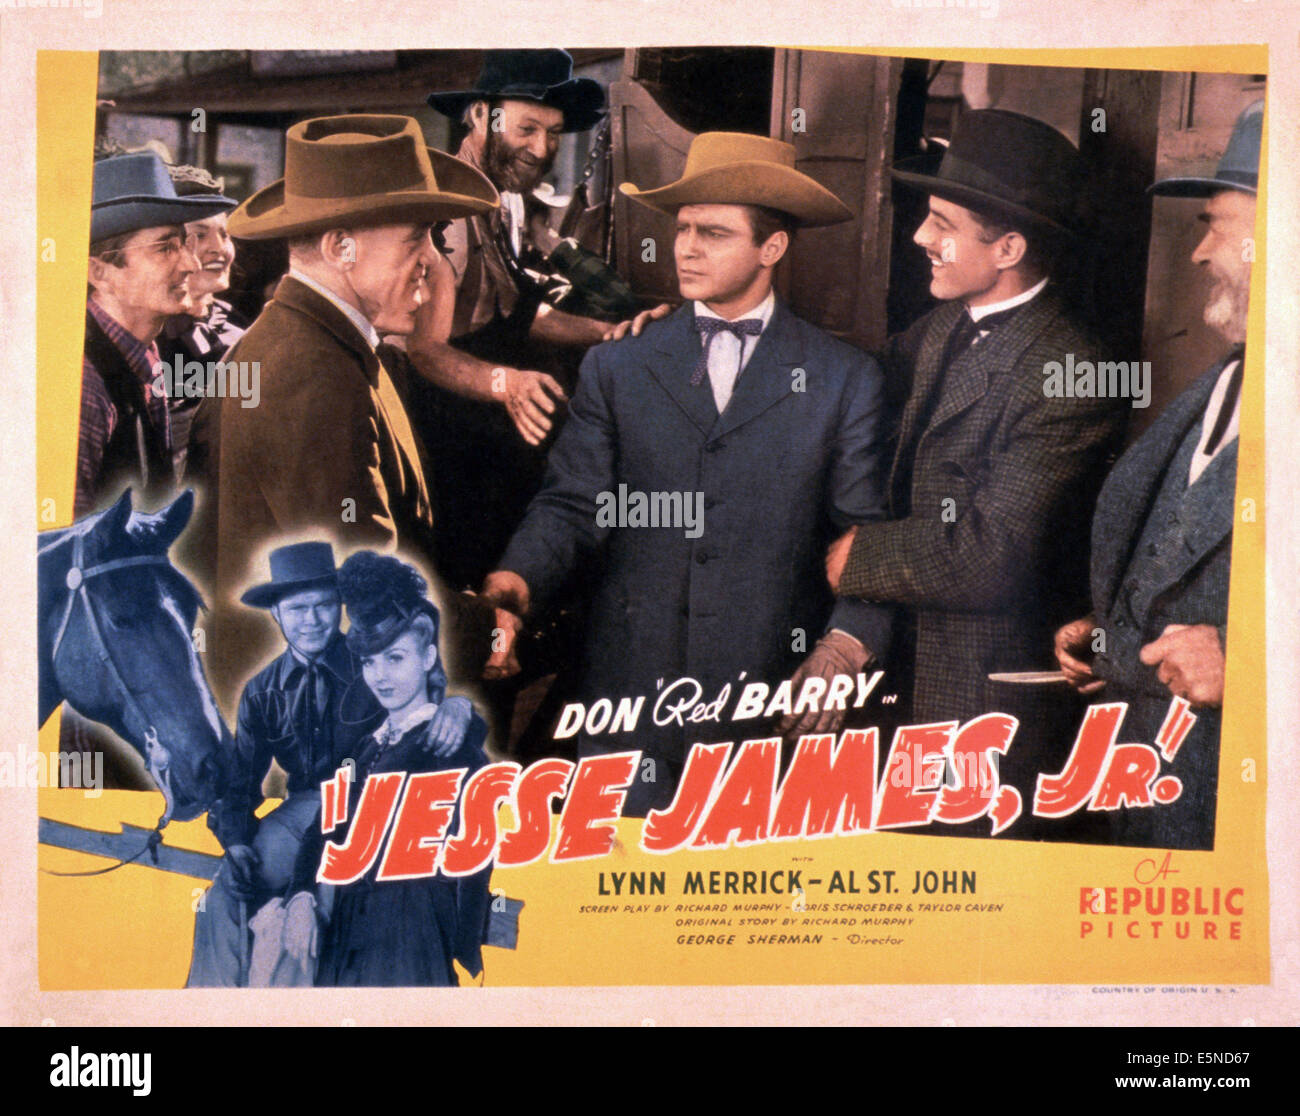 JESSE JAMES JR., Al St. John (beard), Don 'Red' Barry (shaking hands right), front from left: Don 'Red' Barry, Lynn Merrick, Stock Photo